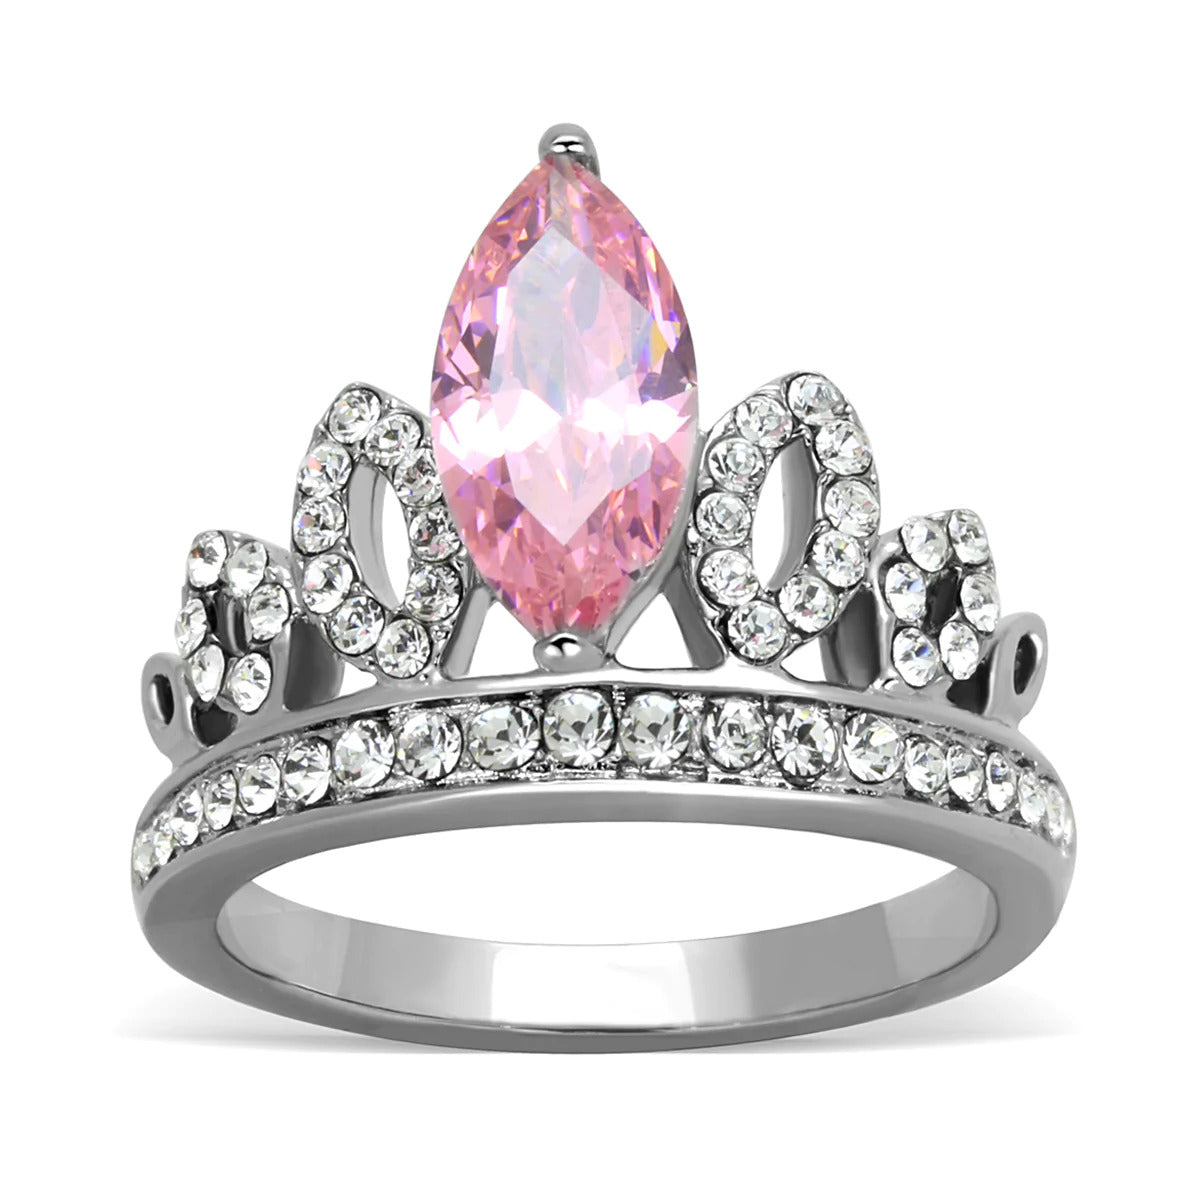 CJG2710 Princess Pink Marquise CZ Stainless Steel Ring